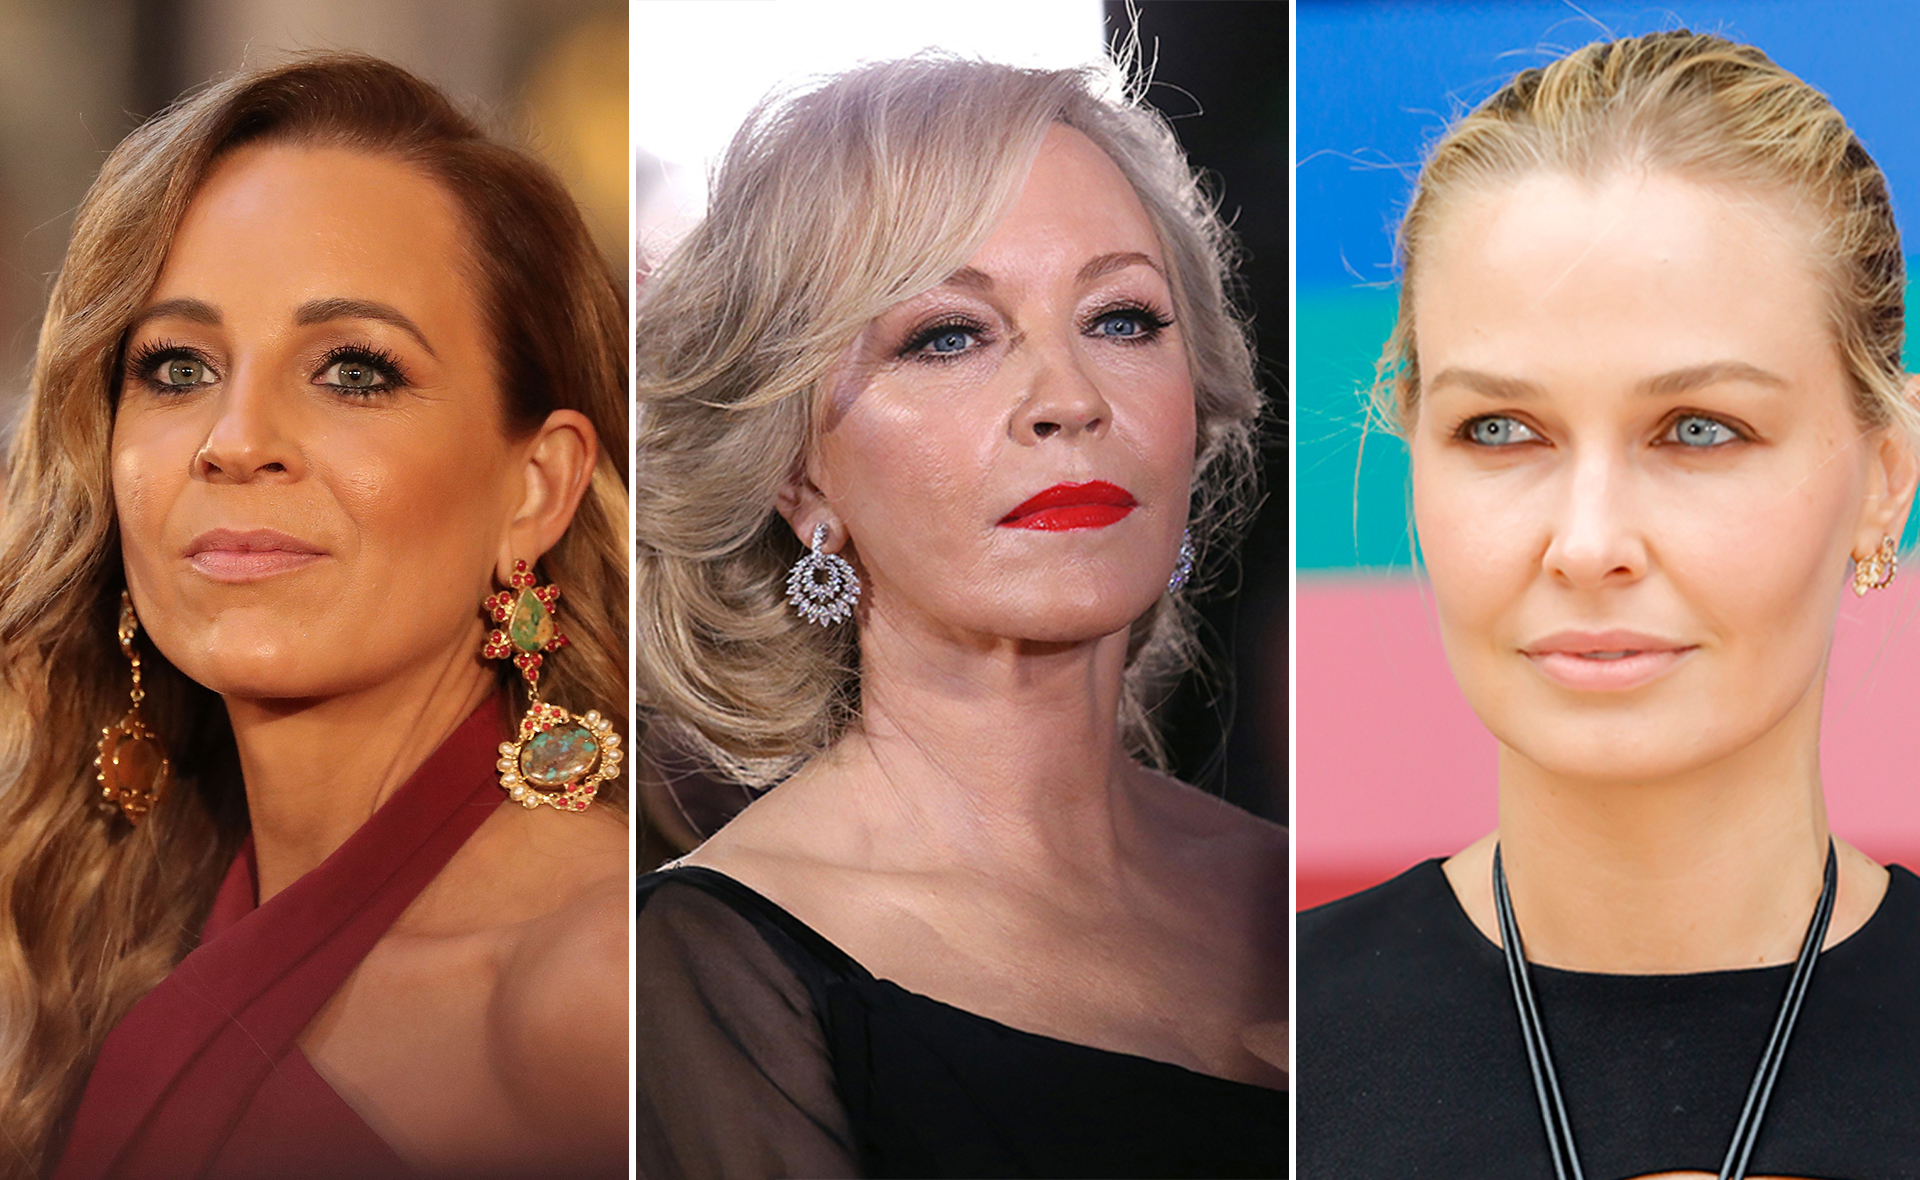 Carrie Bickmore, Lara Worthington and Rebecca Gibney lead the Aussie celebs supporting Ukraine amid Russia’s invasion